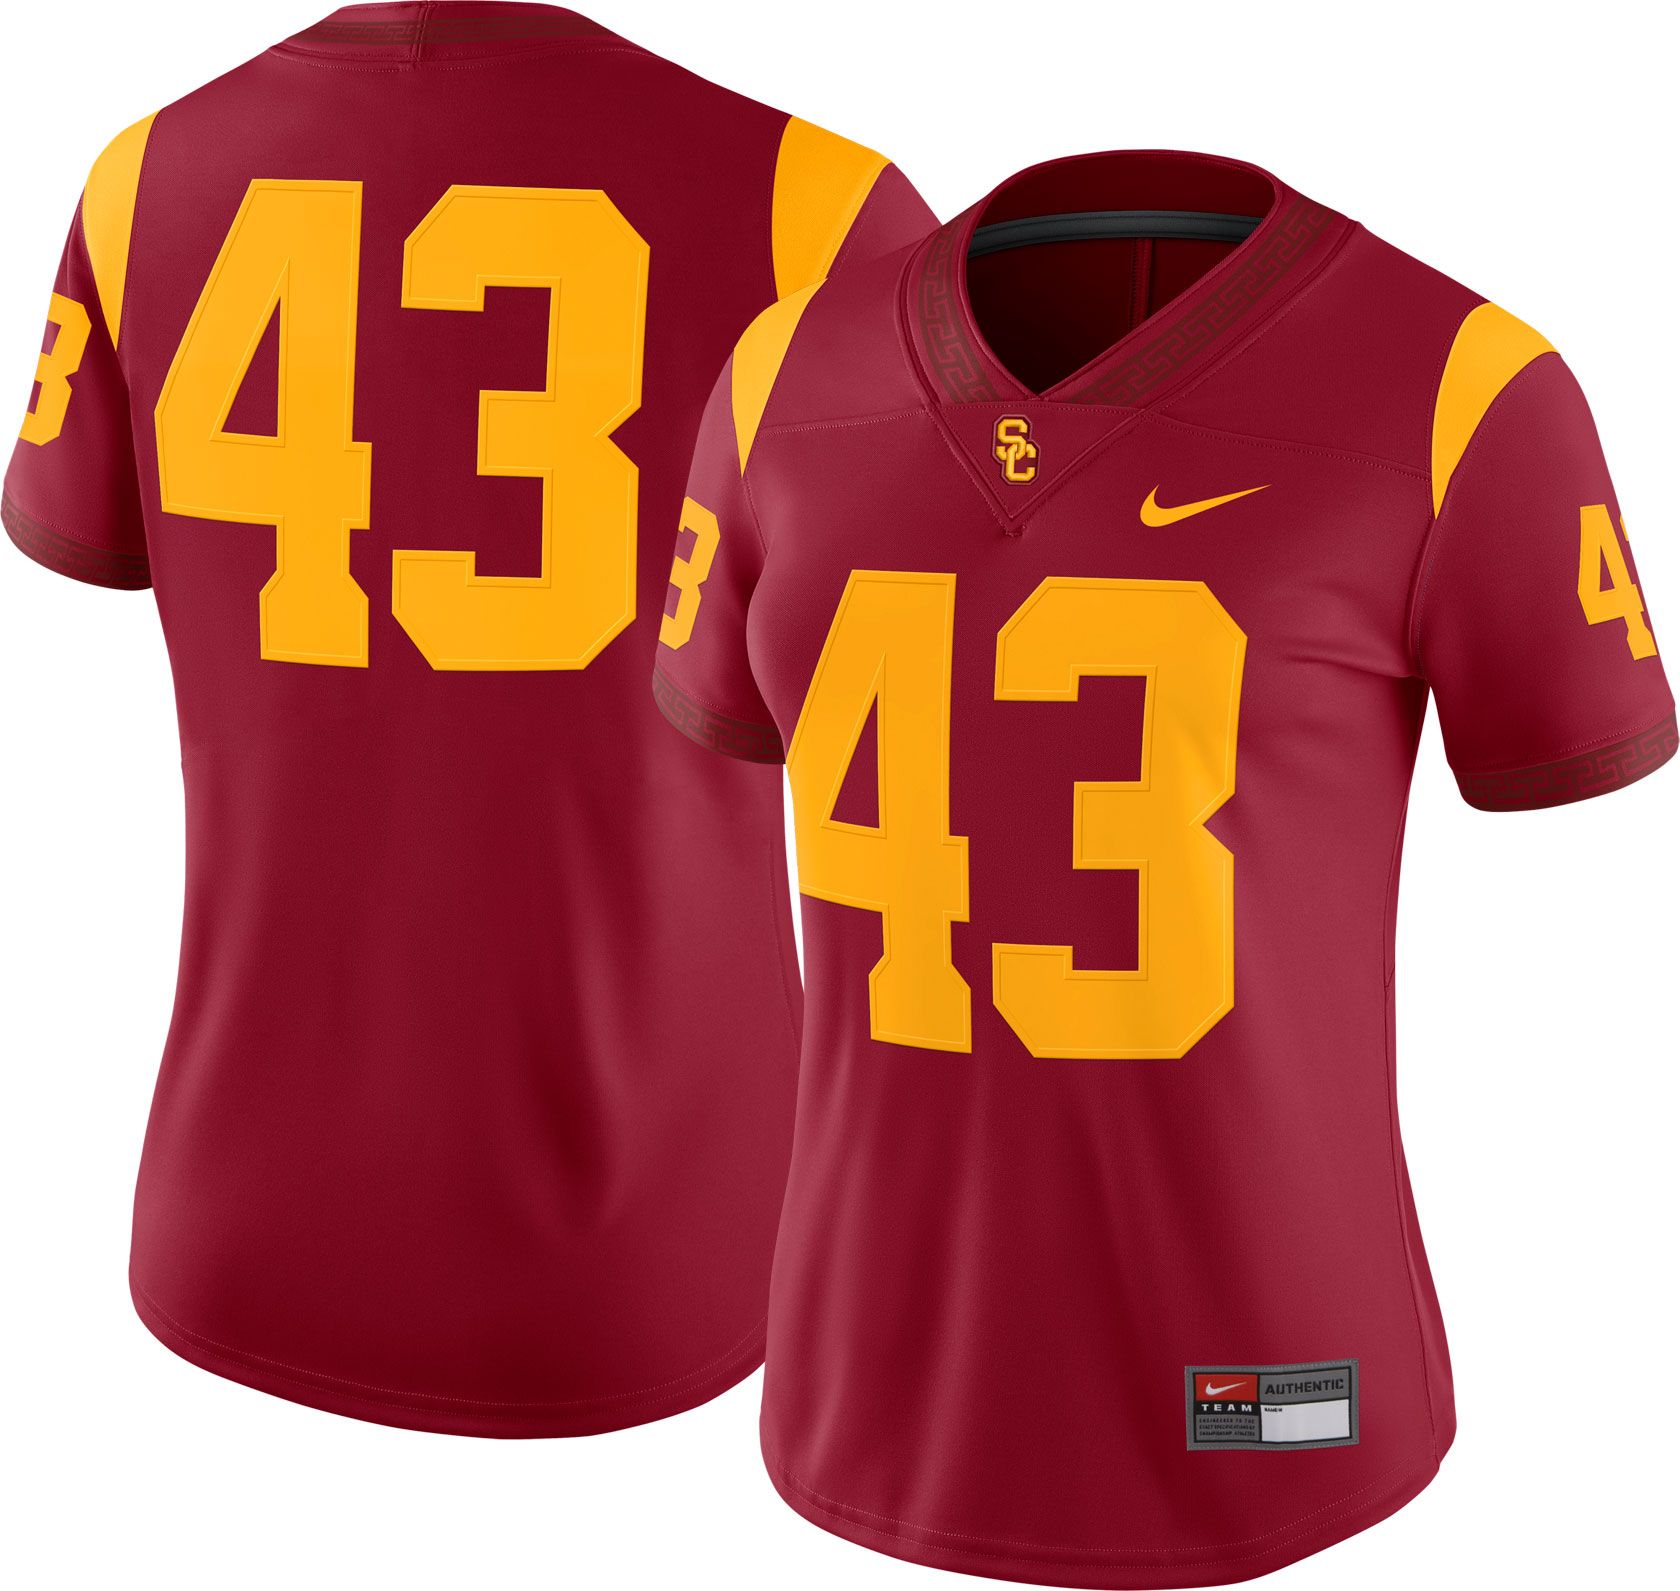 authentic usc football jersey